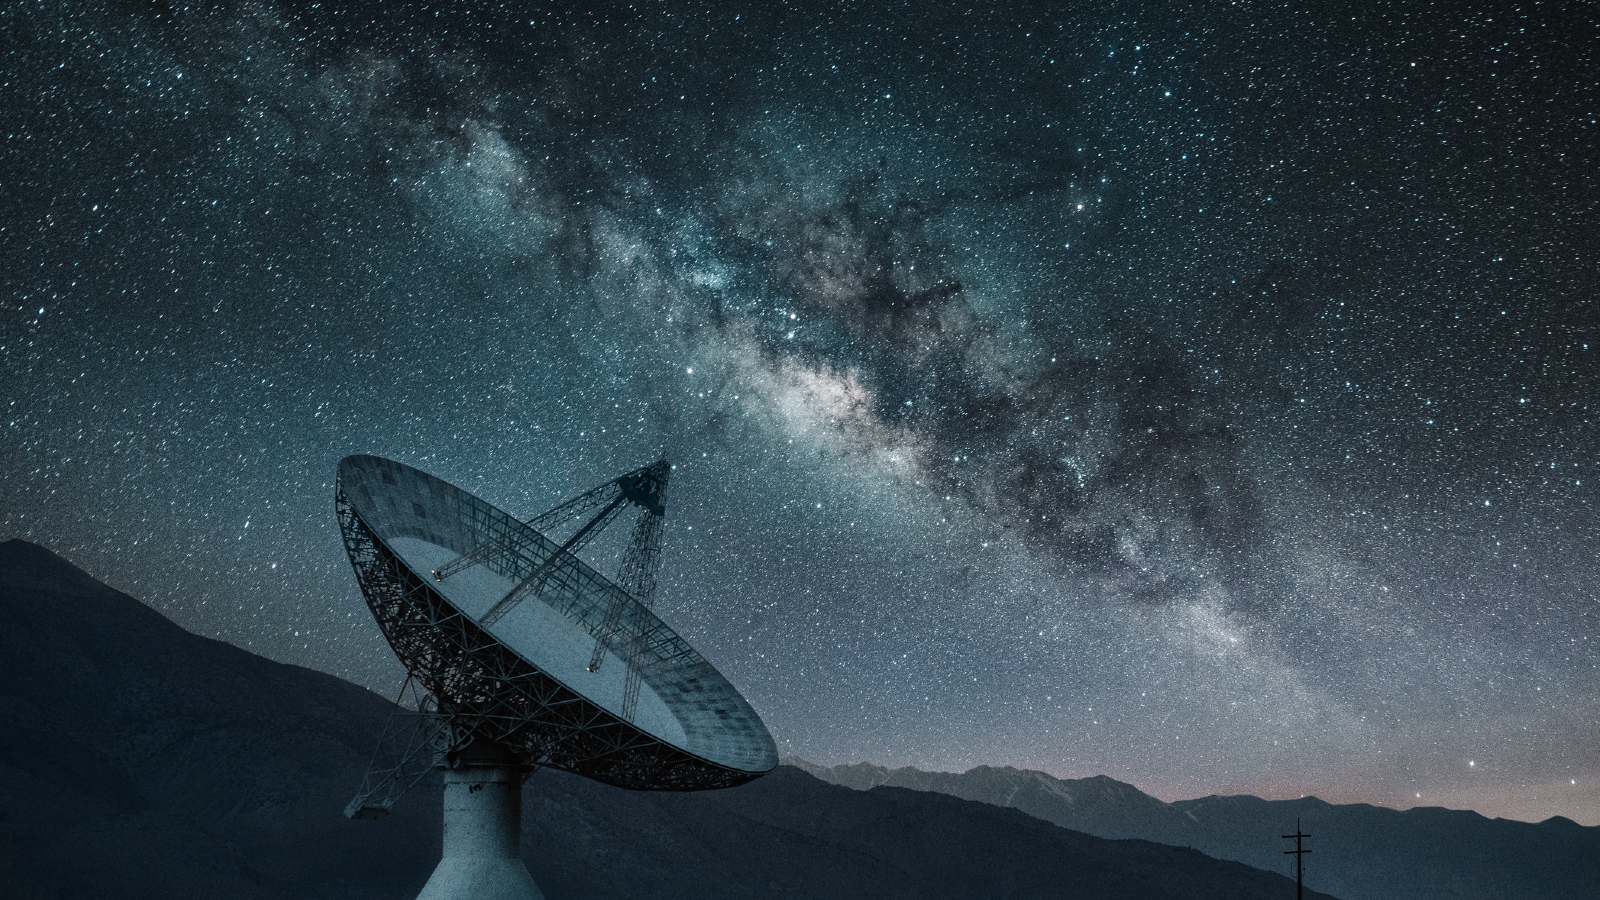 A radio telescope in front of a stary night sky